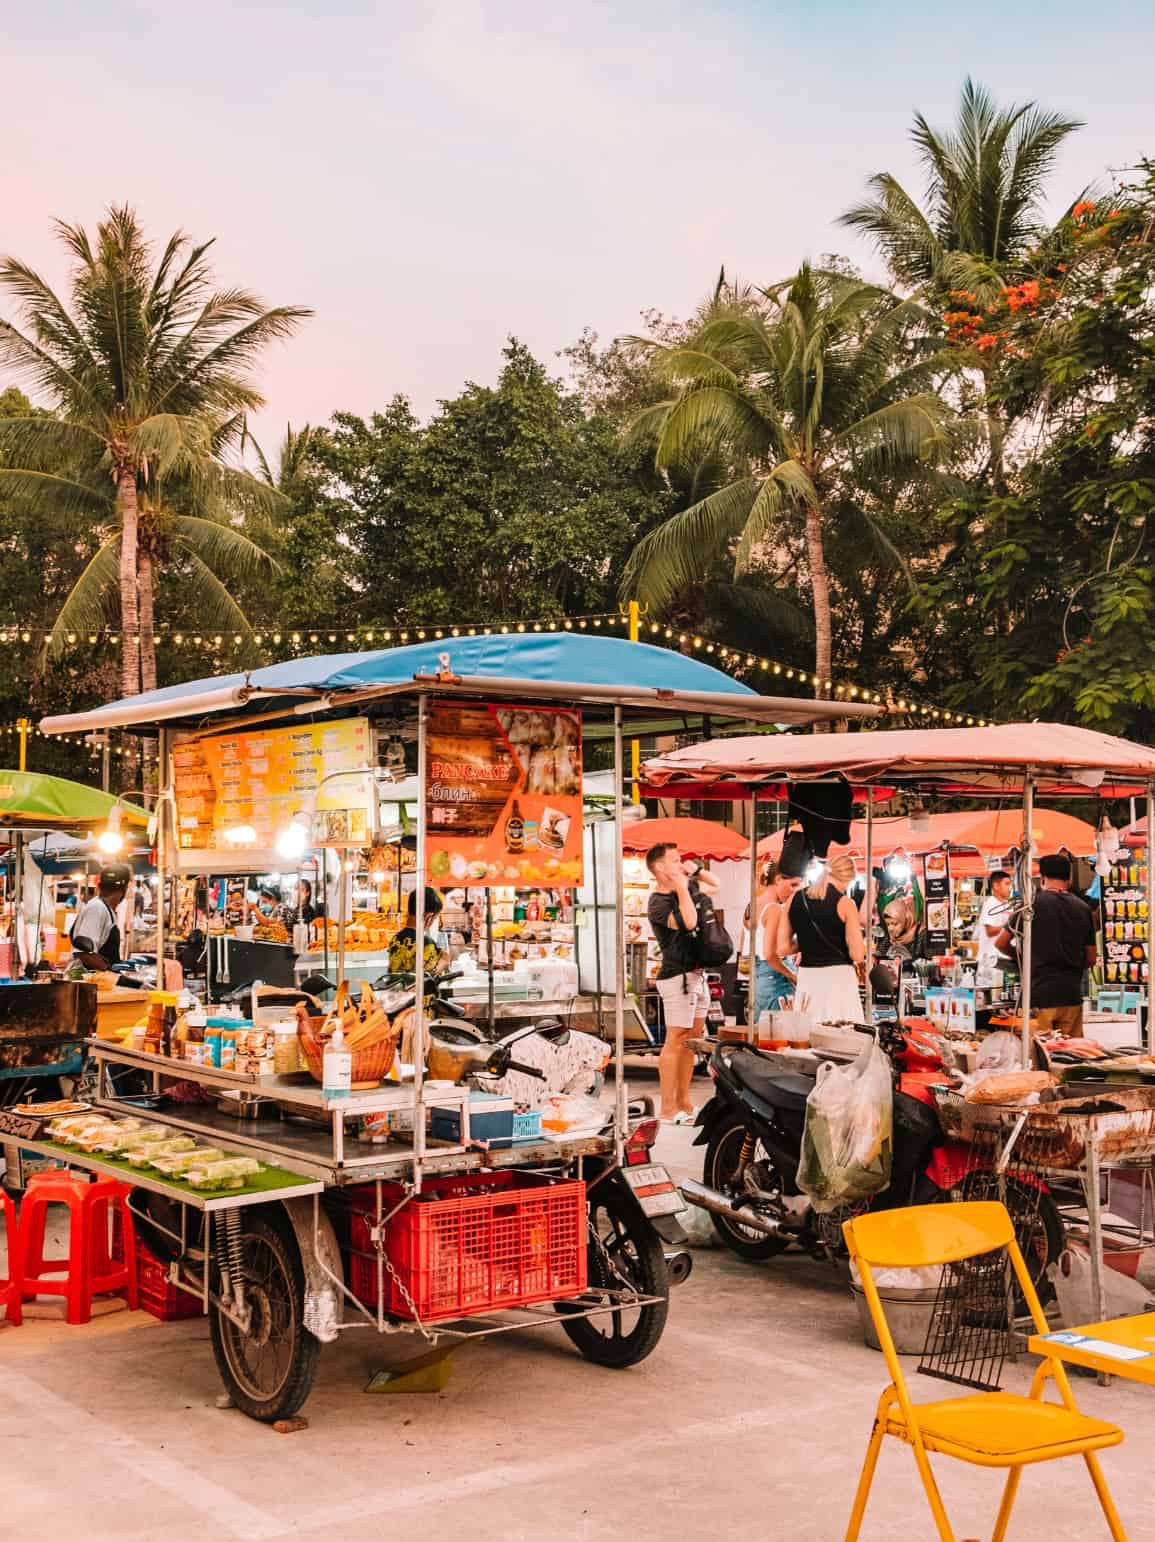 The Chino Market is some of the best Thai food in Patong Beach